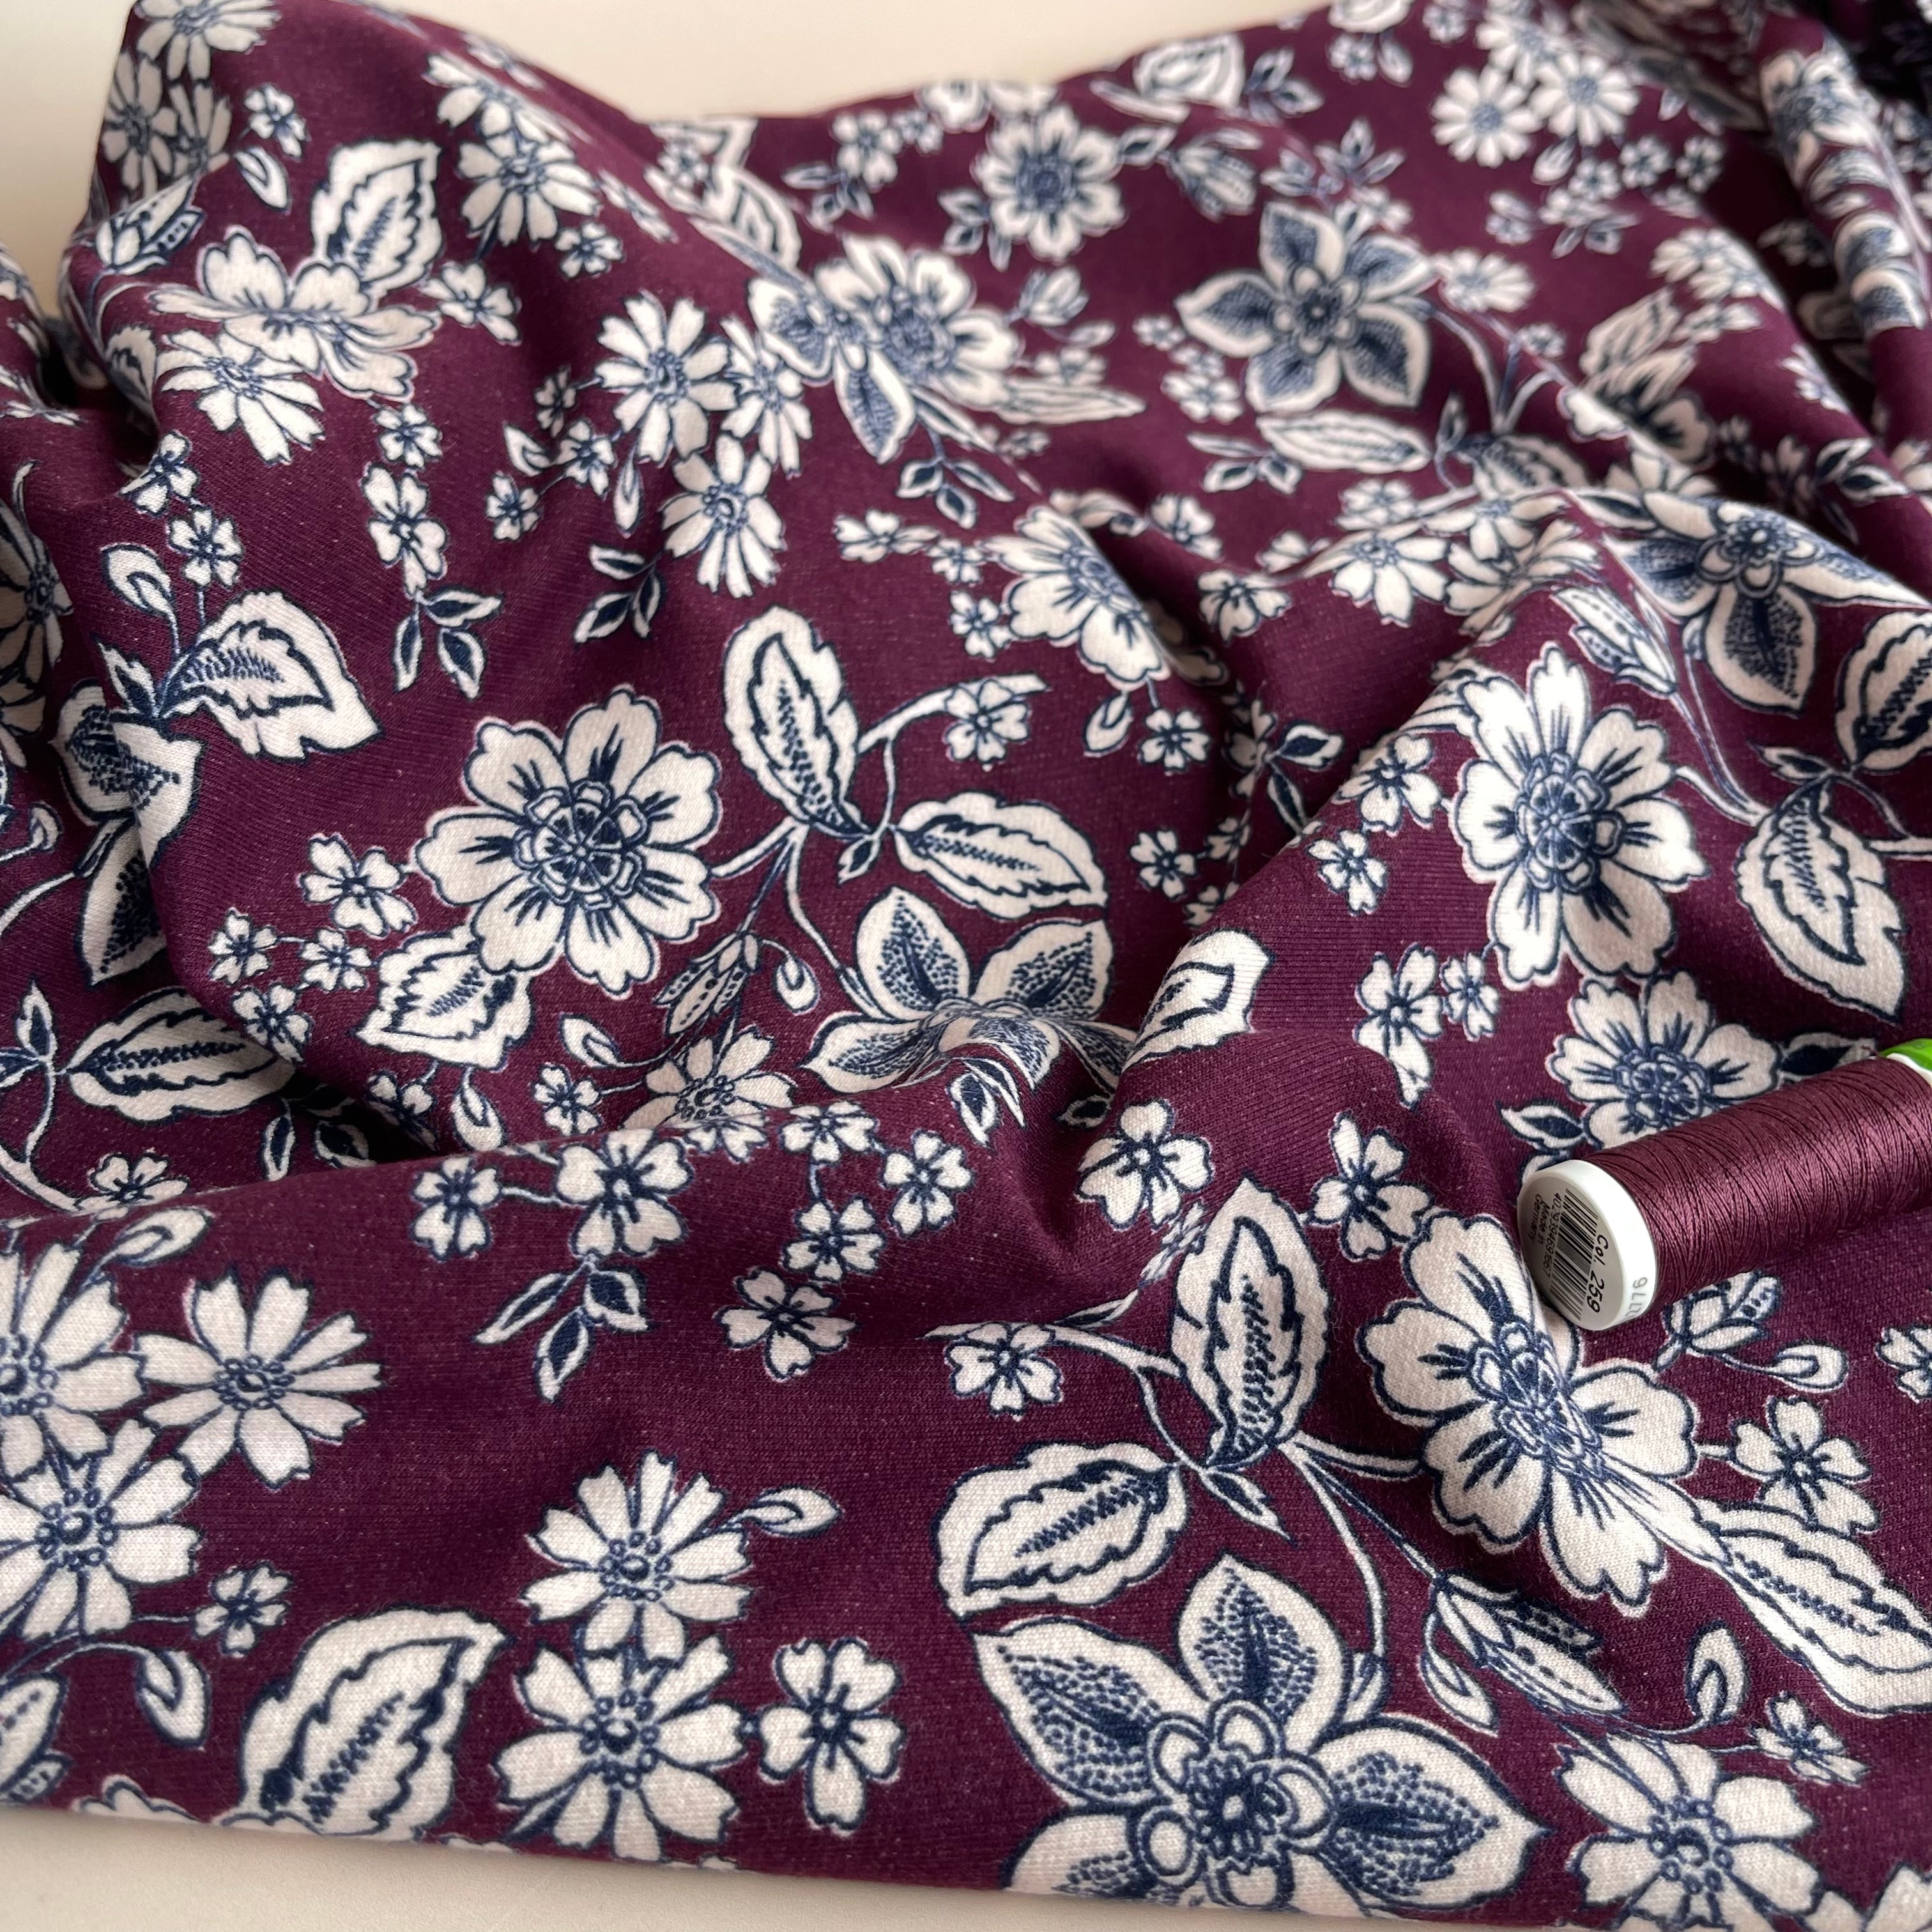 REMNANT 0.47 Metre - Line Flowers Berry Peach Soft Cotton Sweat-shirting Fabric